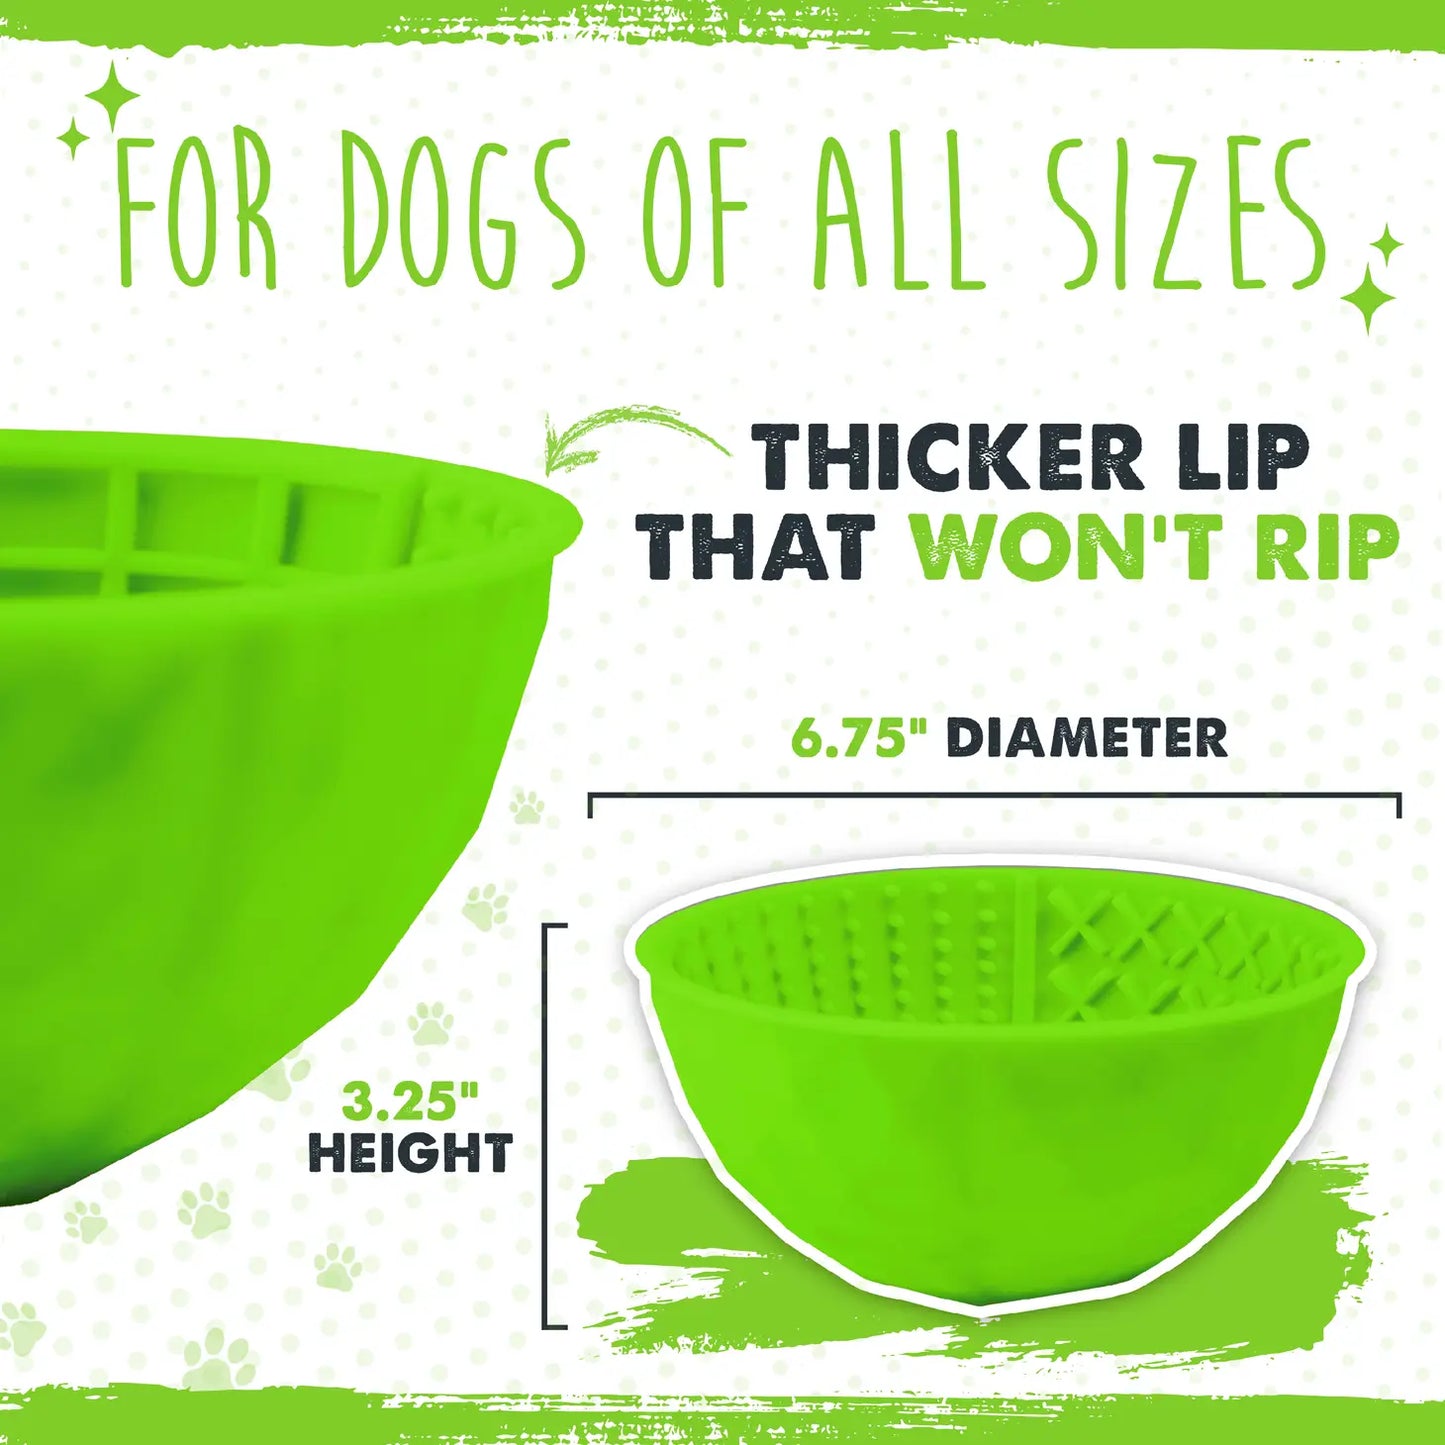 lick bowl is great for dogs of all sizes